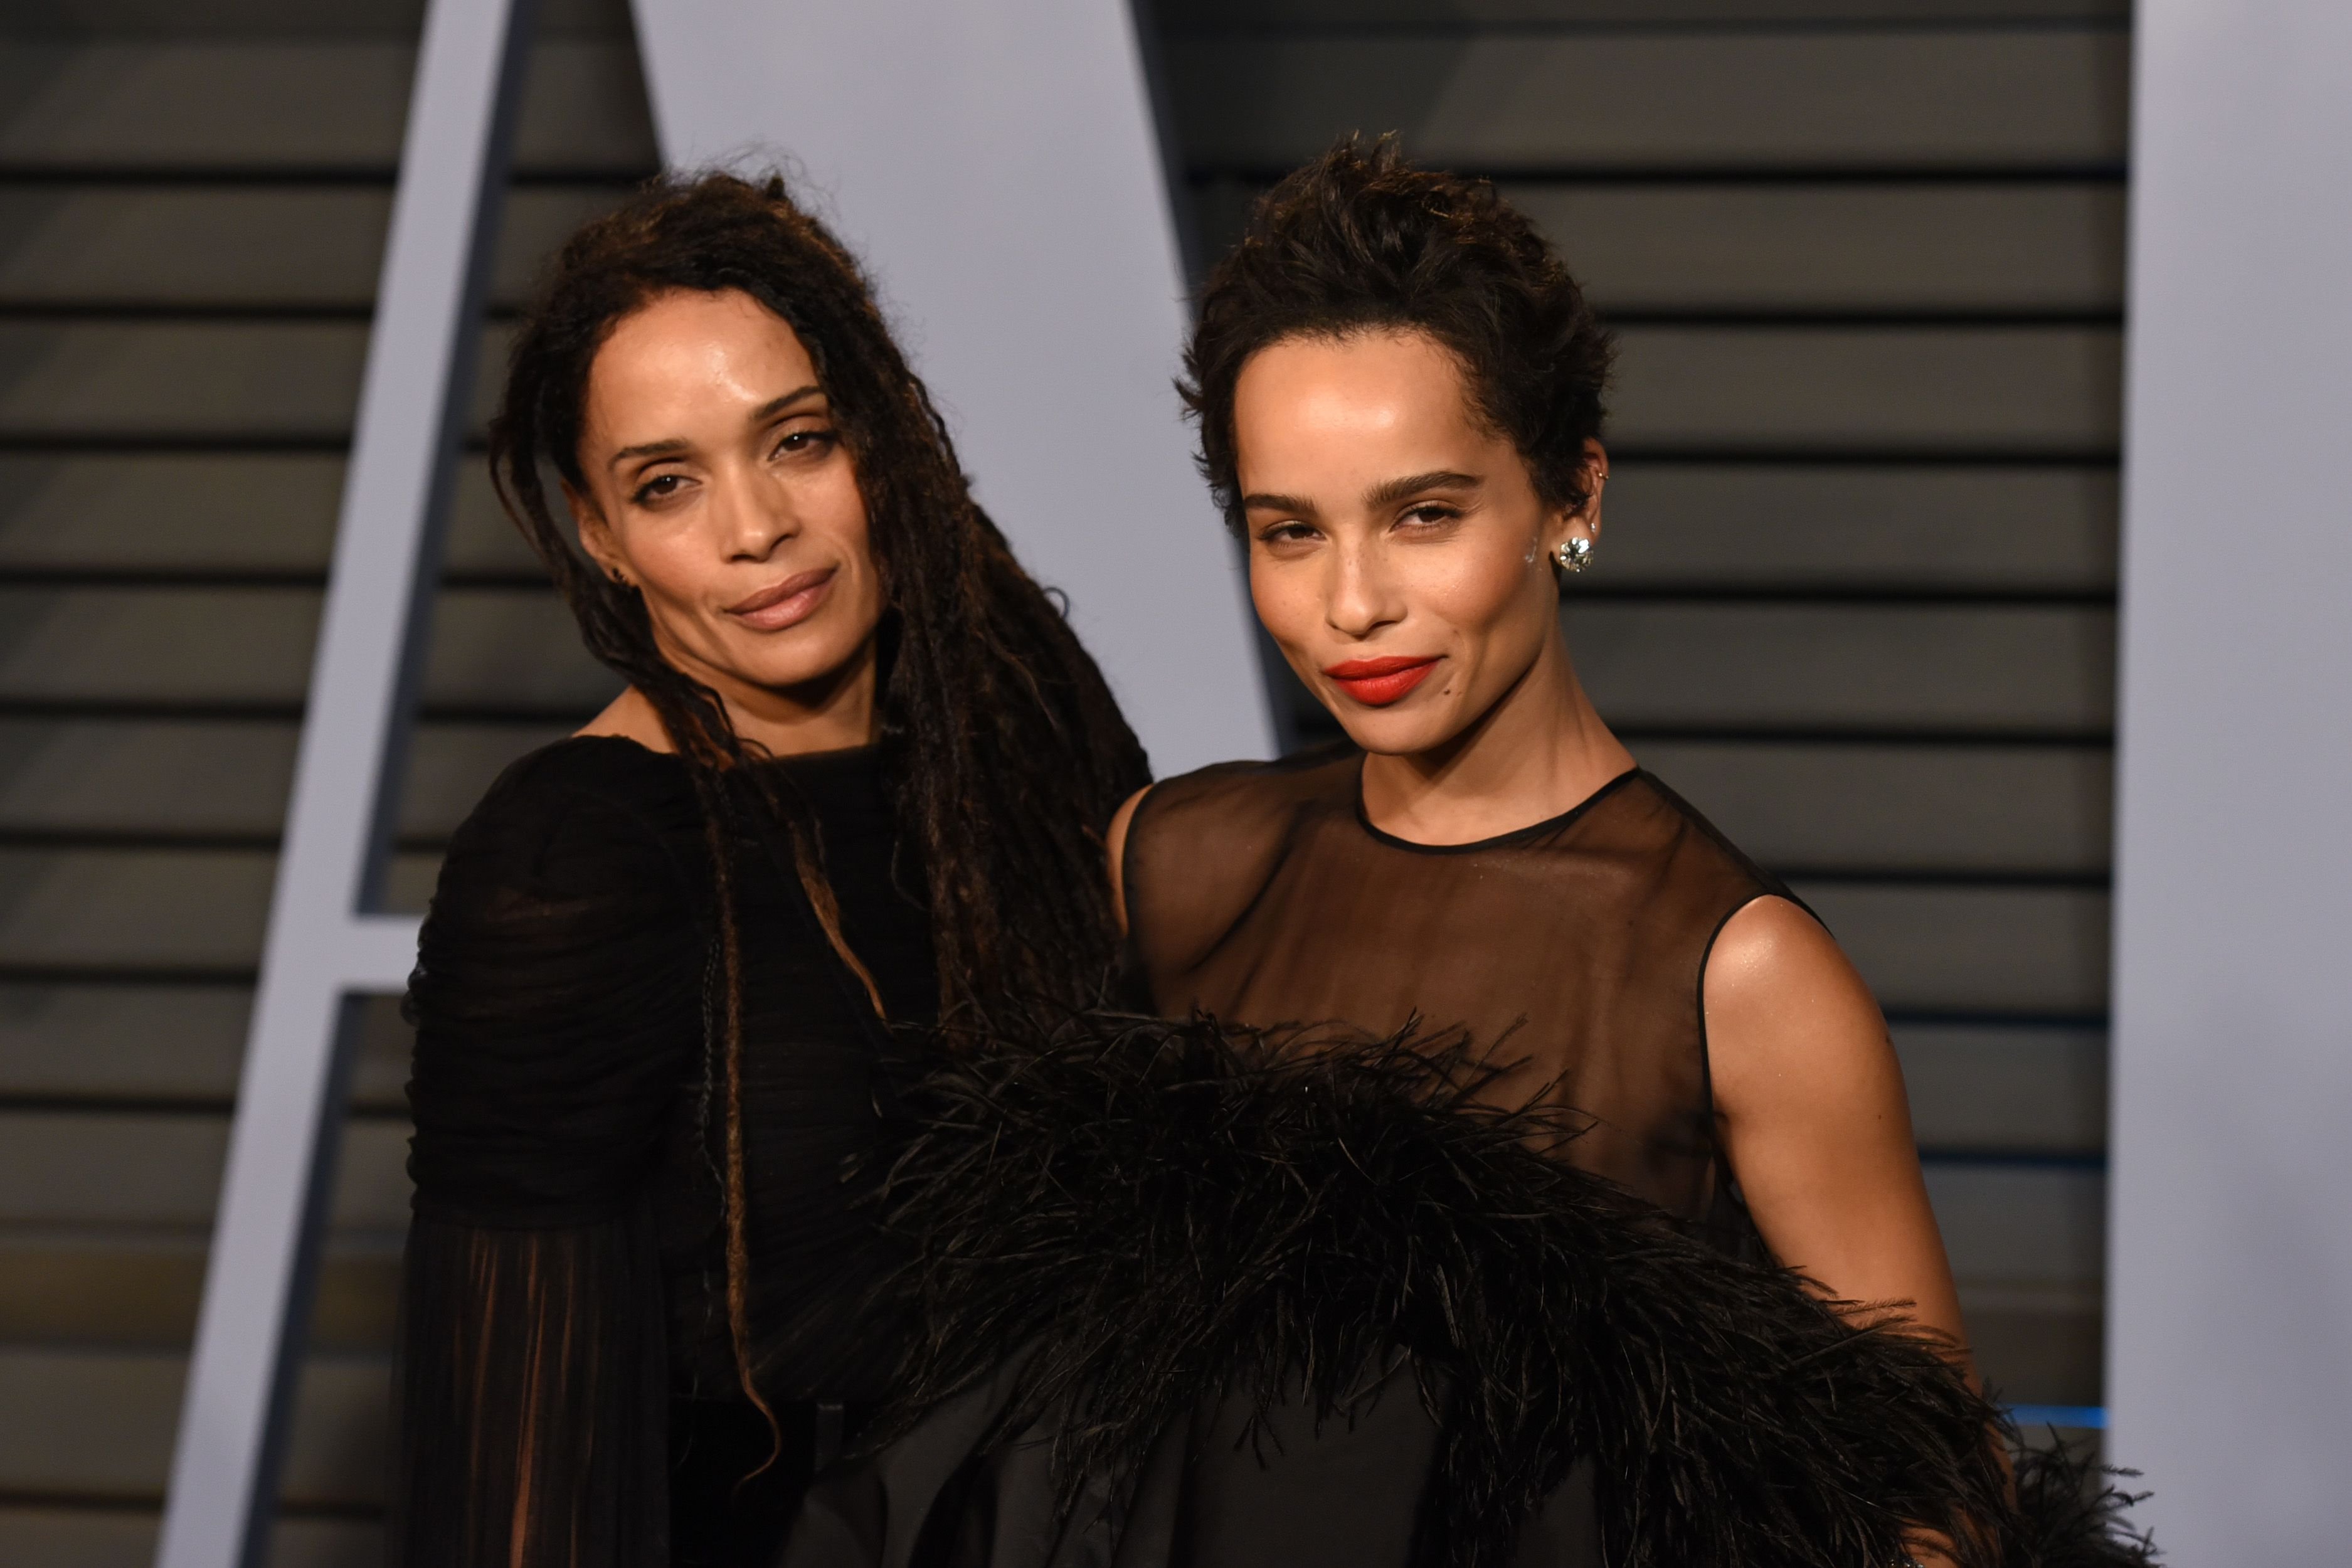 Lisa Bonet and Zoe Kravitz at the 2018 Vanity Fair Oscar Party Hosted By Radhika Jones - Arrivals at Wallis Annenberg Center for the Performing Arts on March 4, 2018 | Photo: Getty Images